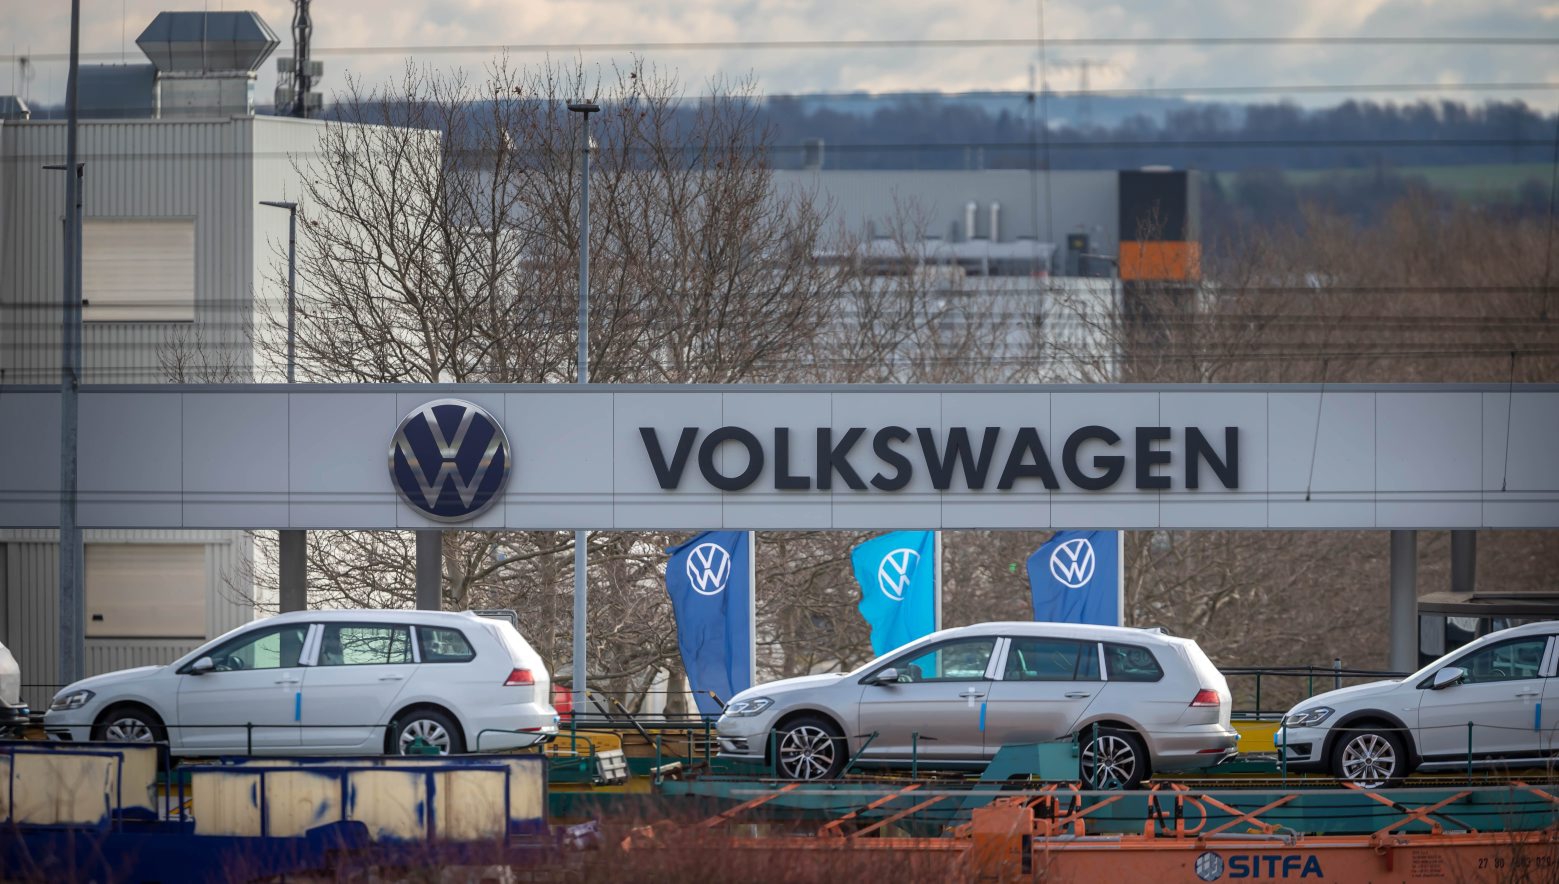 epa08247062 The Volkswagen (VW) vehicle factory in Zwickau, Germany, 25 February 2020. The Volkswagen annual press conference will be held on 17 March 2020 in Wolfsburg.  EPA/UWE MEINHOLD GERMANY VOLKSWAGEN